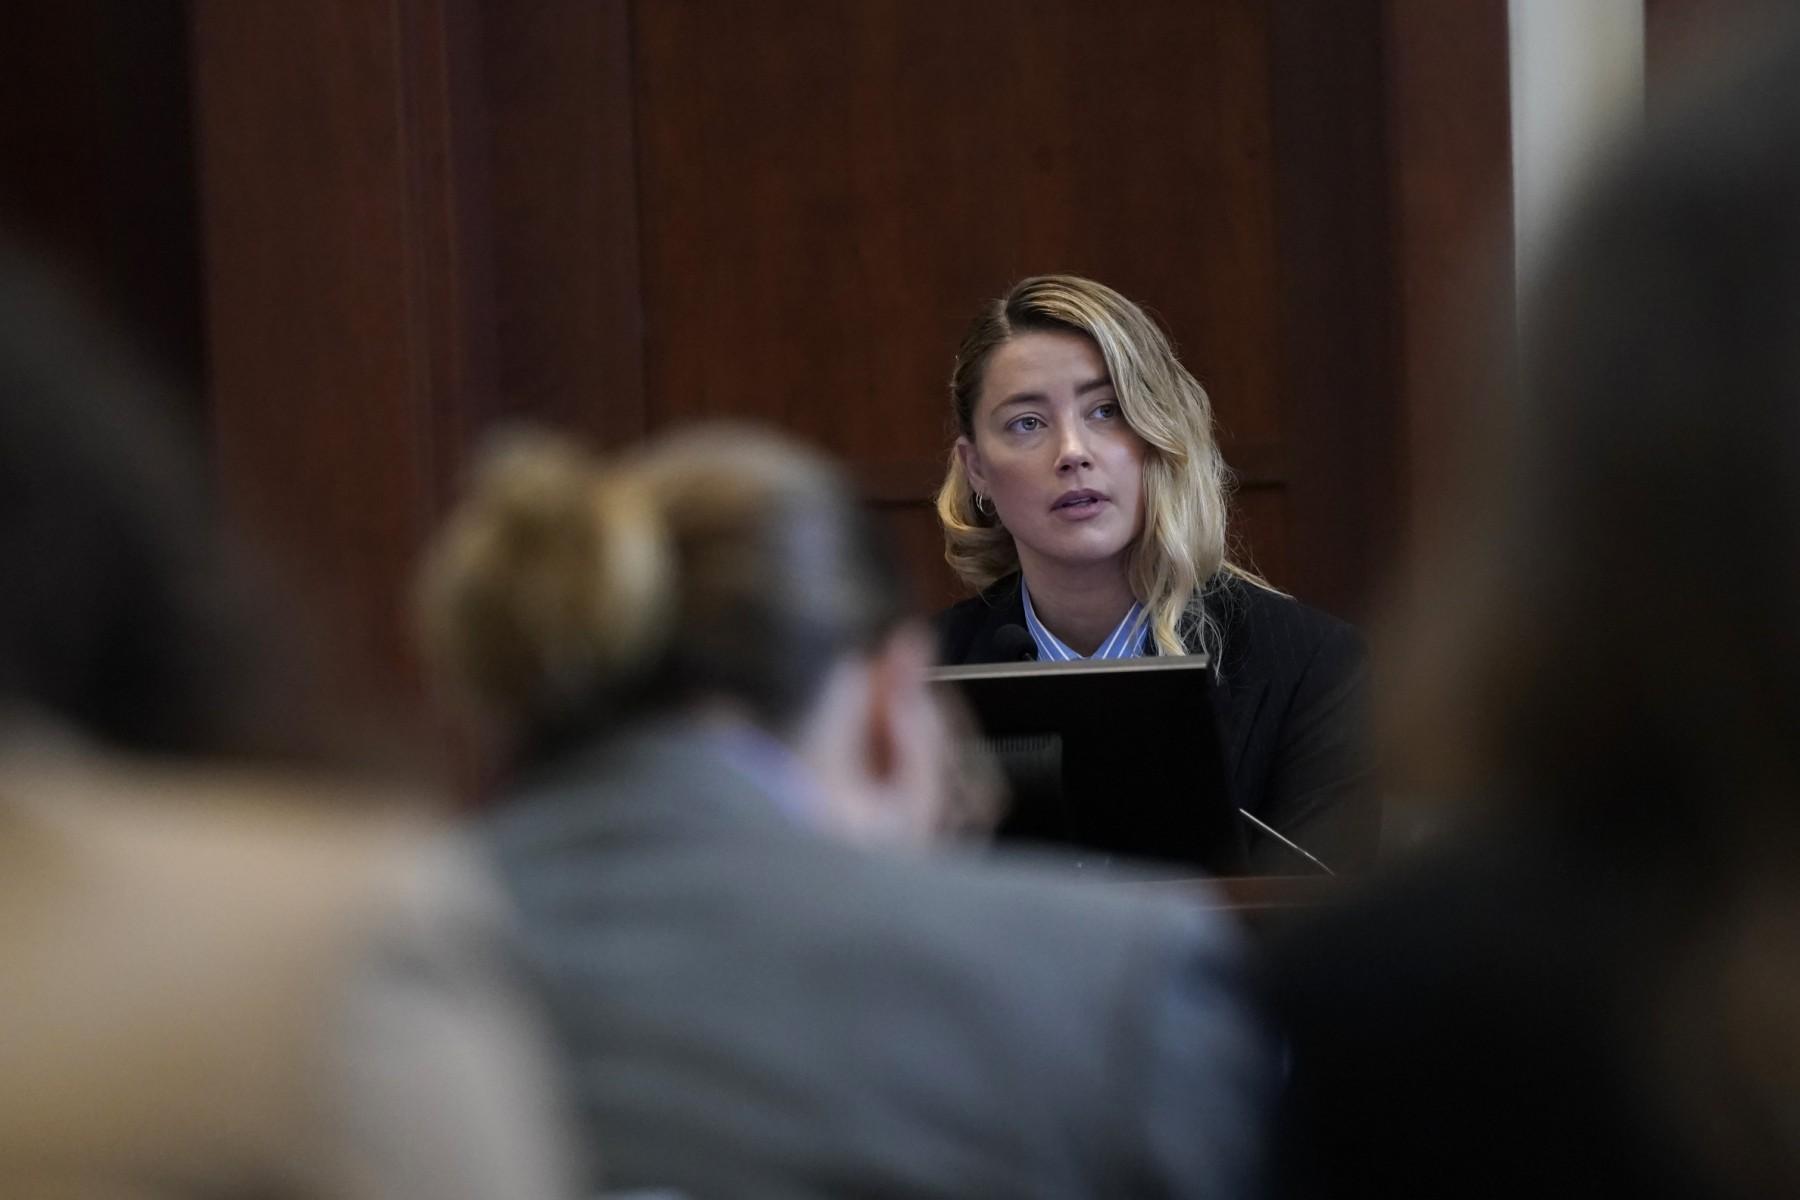 Actor Amber Heard testifies at Fairfax County Circuit Court during a defamation case against her by ex-husband, actor Johnny Depp in Fairfax, Virginia, on May 4. Photo: AFP